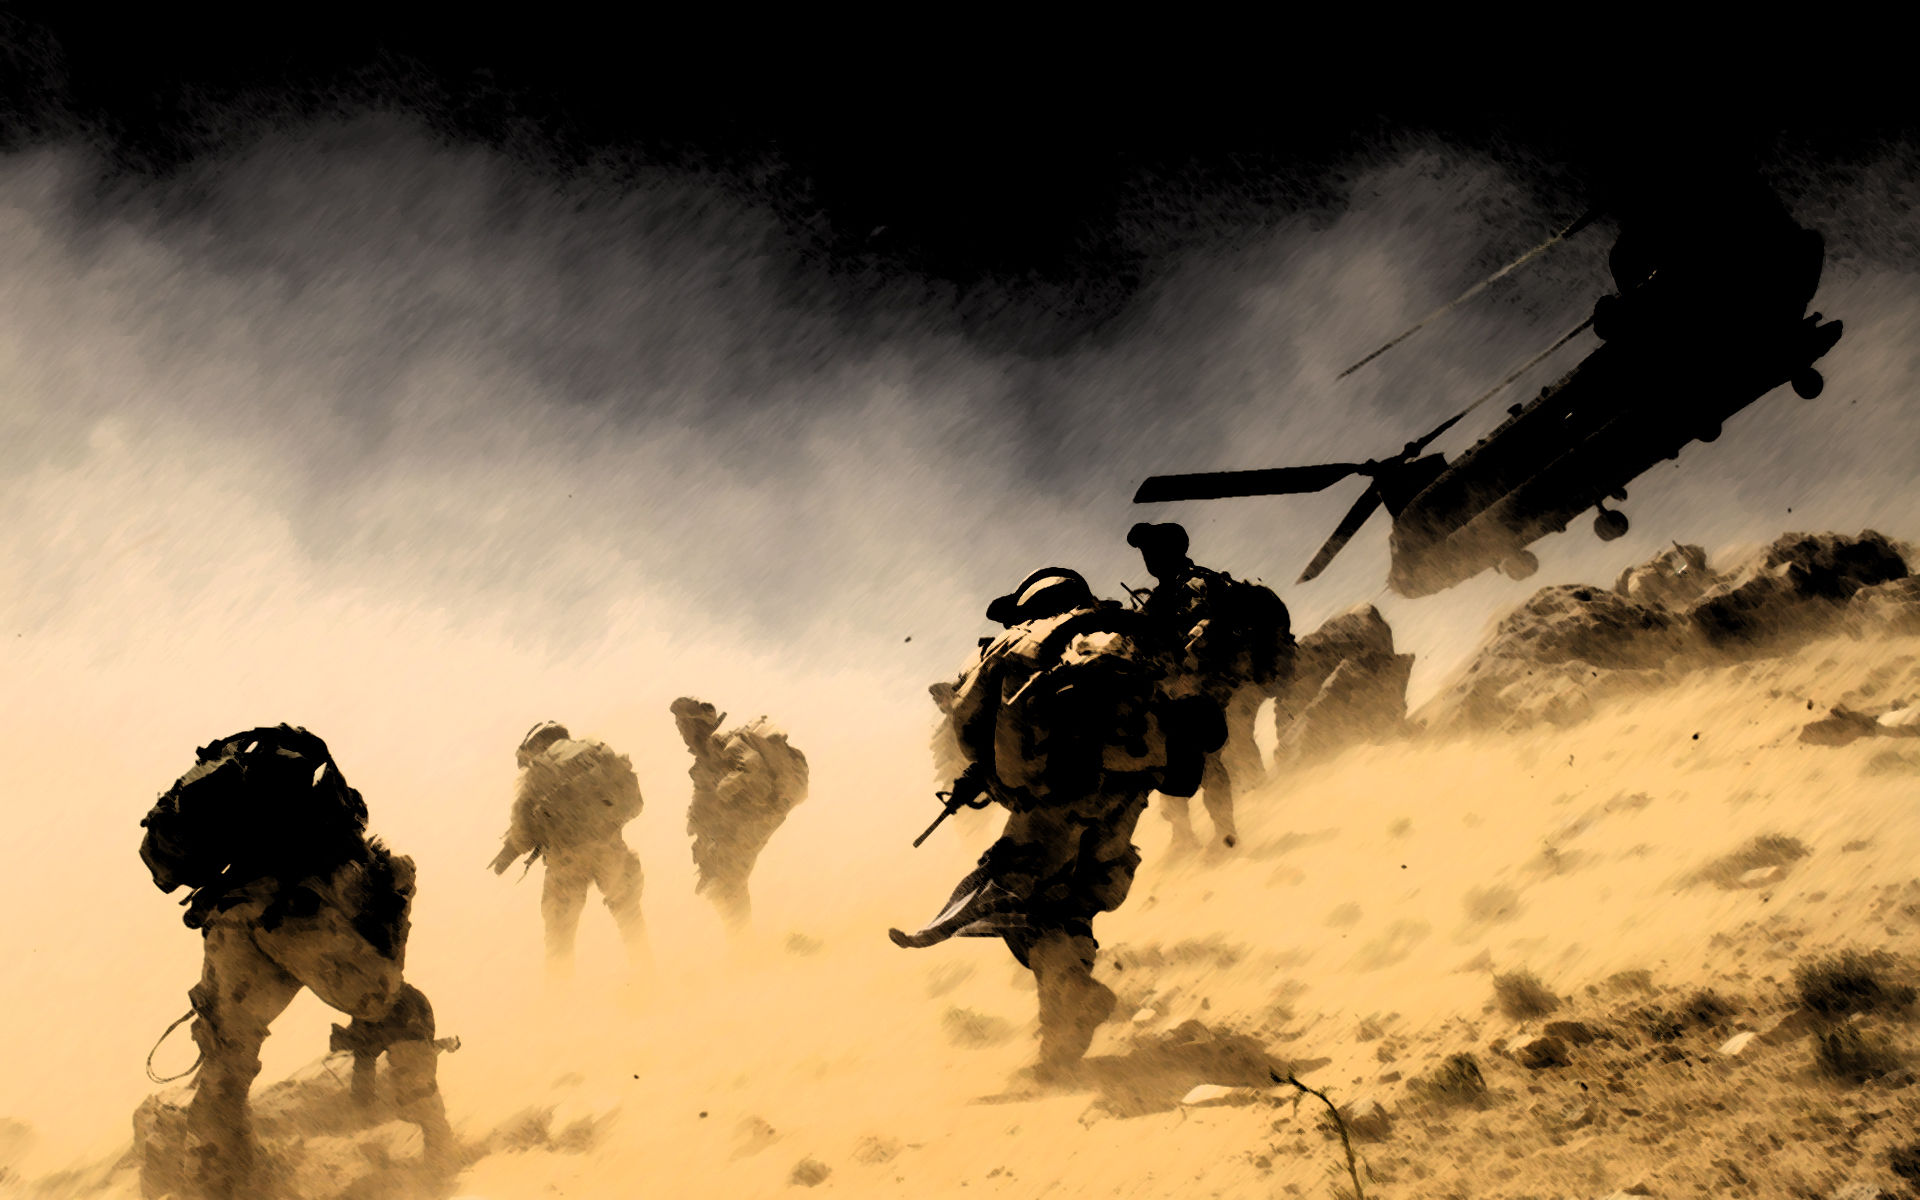 Us Army HD Wallpaper Image Cool